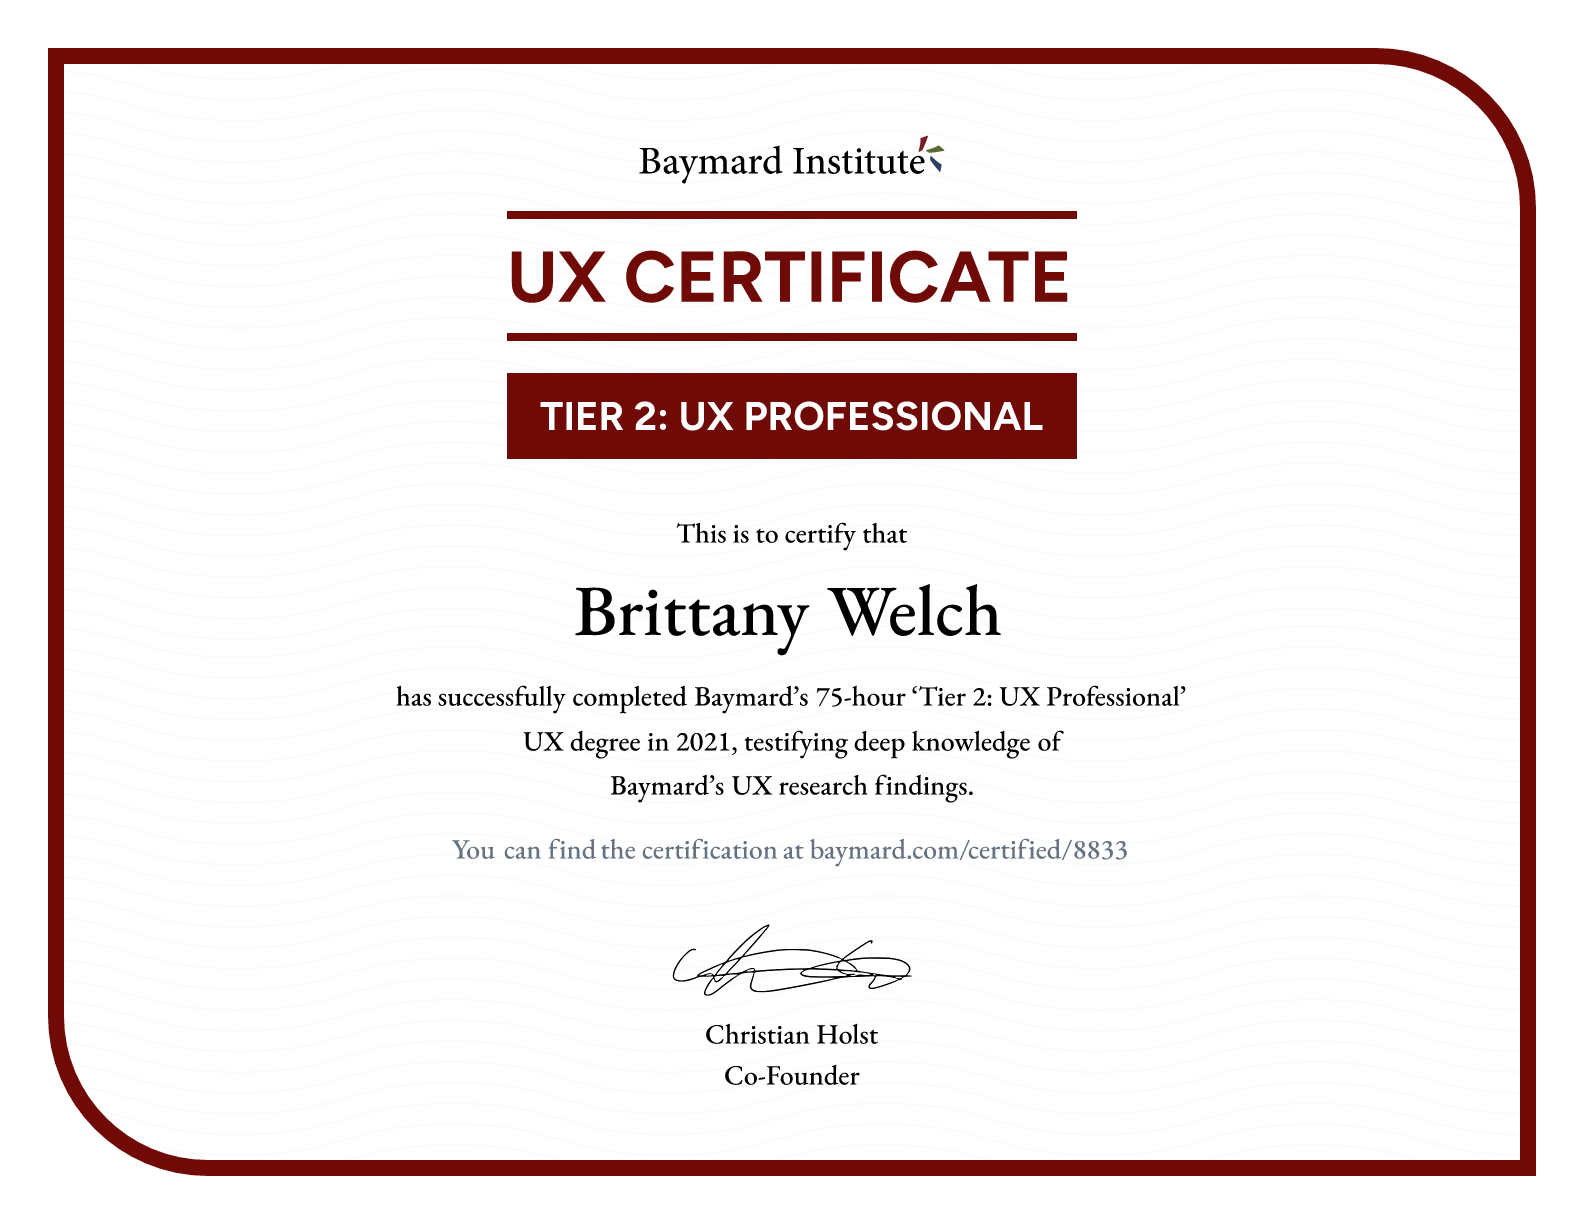 Brittany Welch’s certificate